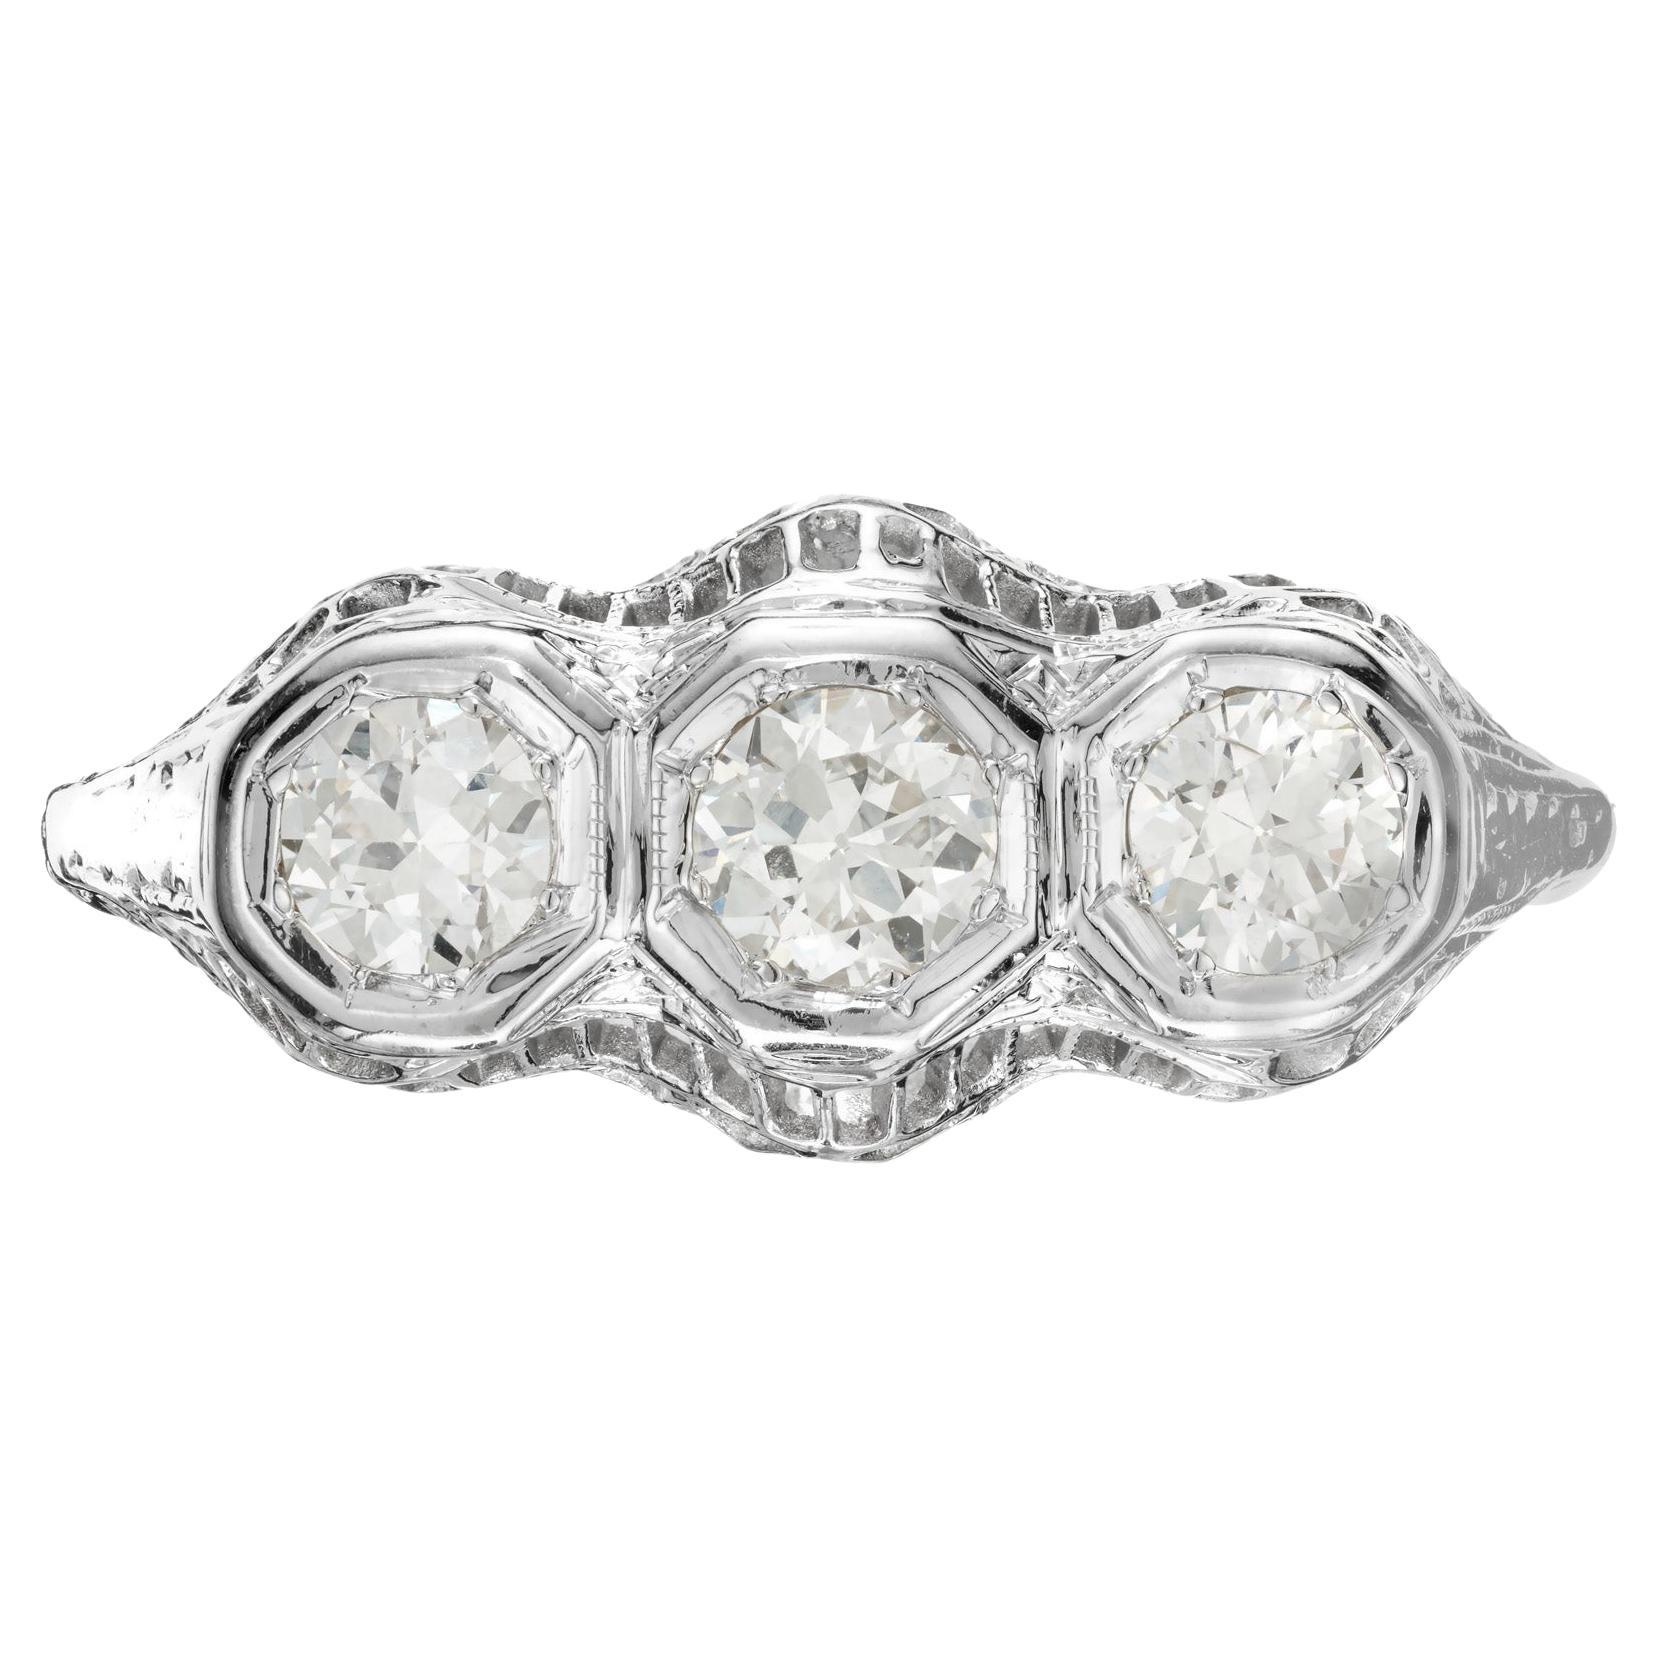 1930's round diamond, three-stone ring. .60cts of diamonds set in a filigree 18k white gold setting. 

3 round diamonds, G VS2 approx. .60cts
18k white gold 
Stamped: 18k
2.7 grams 
Width at top: 8.5mm
Height at top: 5.8mm
Width at bottom: 1.3mm
